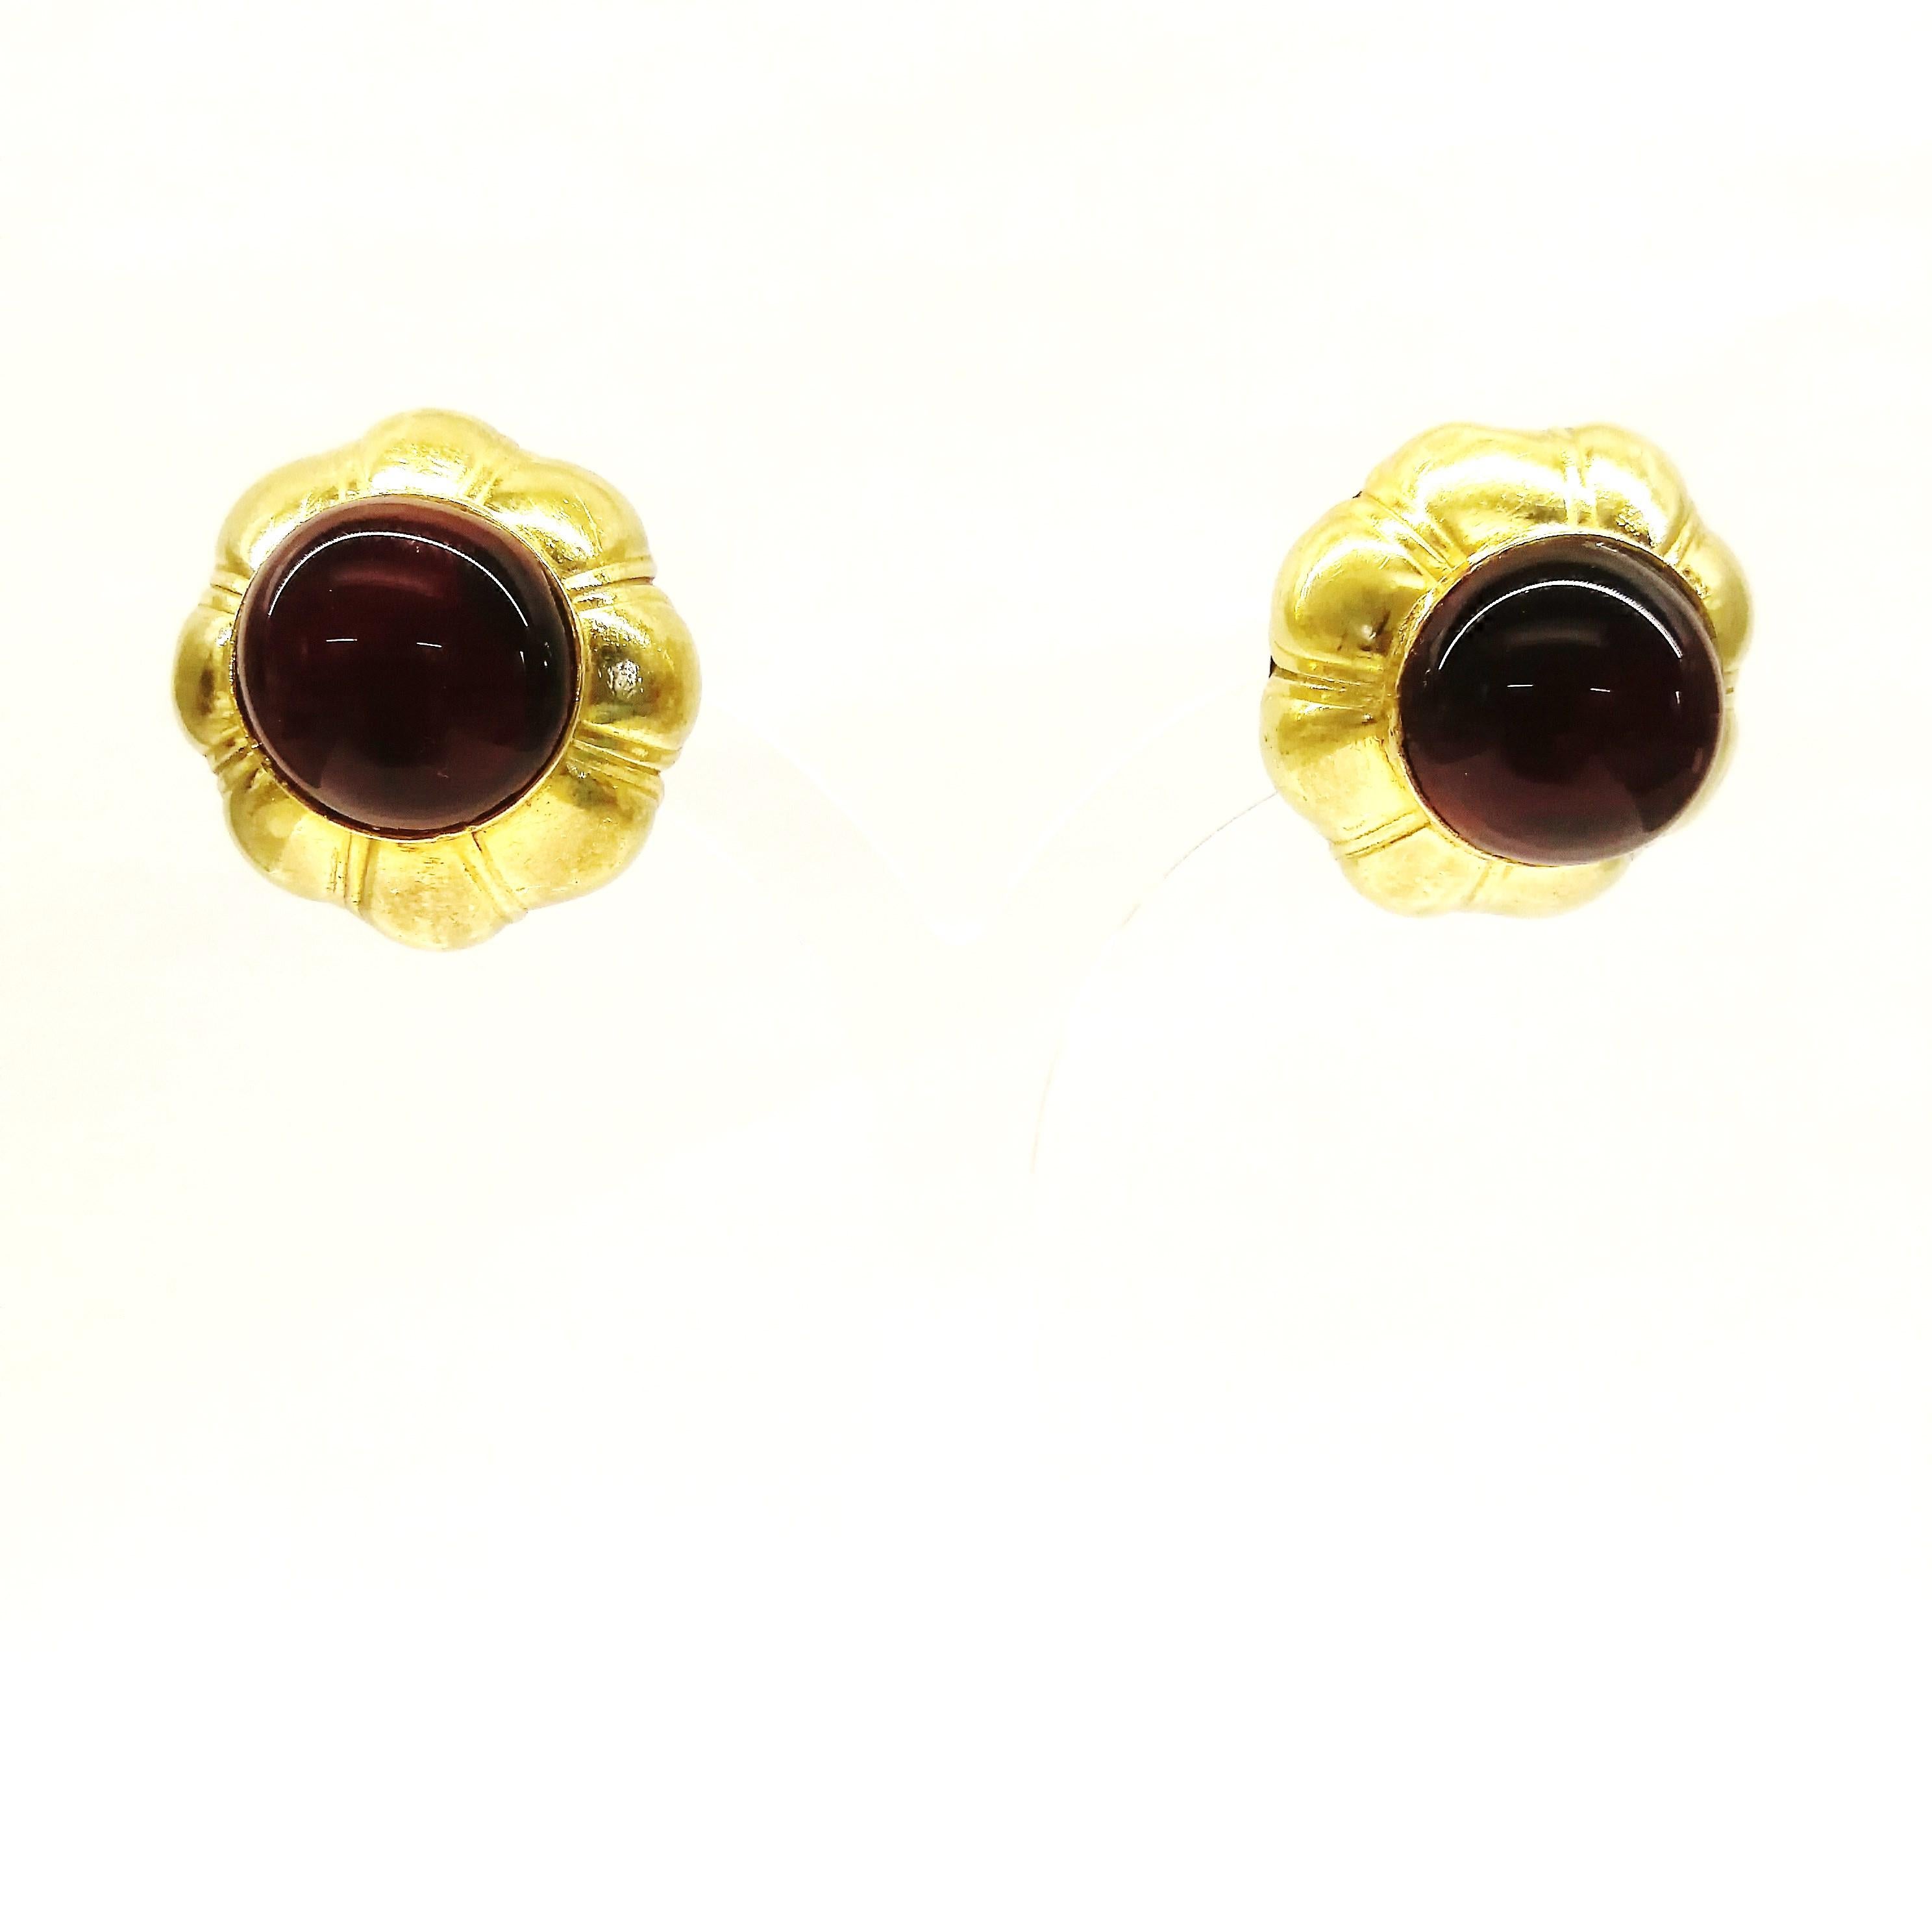 Ruby poured glass and gilt metal earrings, Goossens for Chanel, France, 1960s. 1